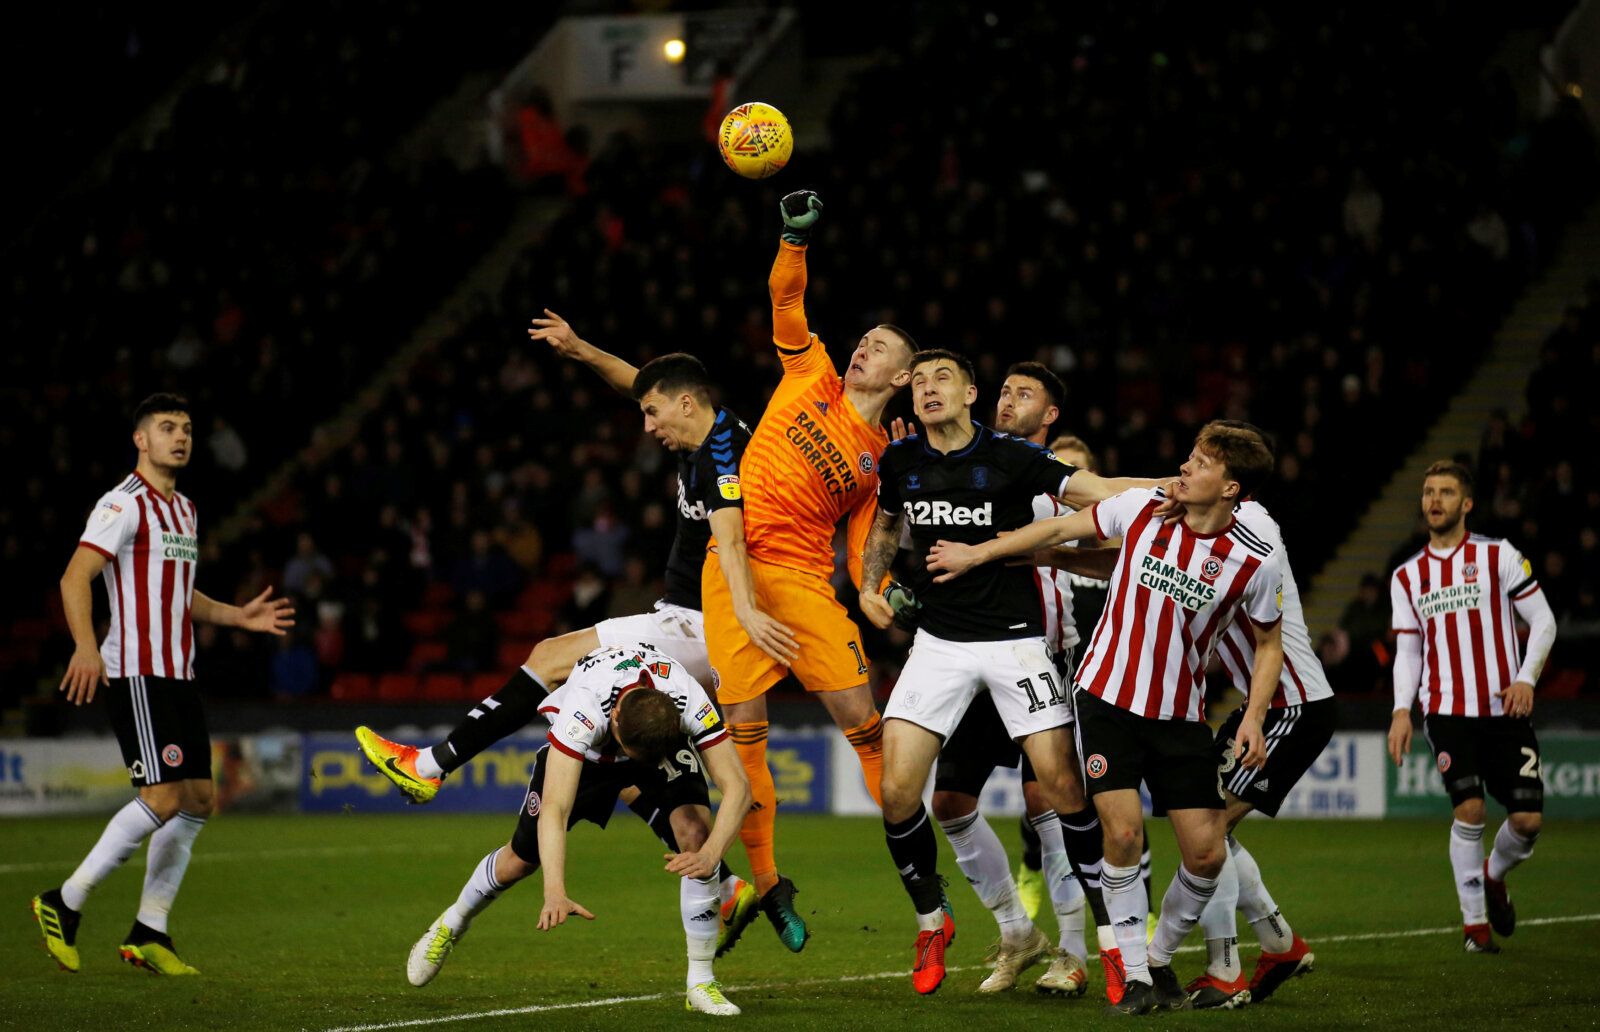 Soccer Football - Championship - Sheffield United v Middlesbrough - Bramall Lane, Sheffield, Britain - February 13, 2019   Sheffield United's Dean Henderson in action   Action Images/Craig Brough    EDITORIAL USE ONLY. No use with unauthorized audio, video, data, fixture lists, club/league logos or 